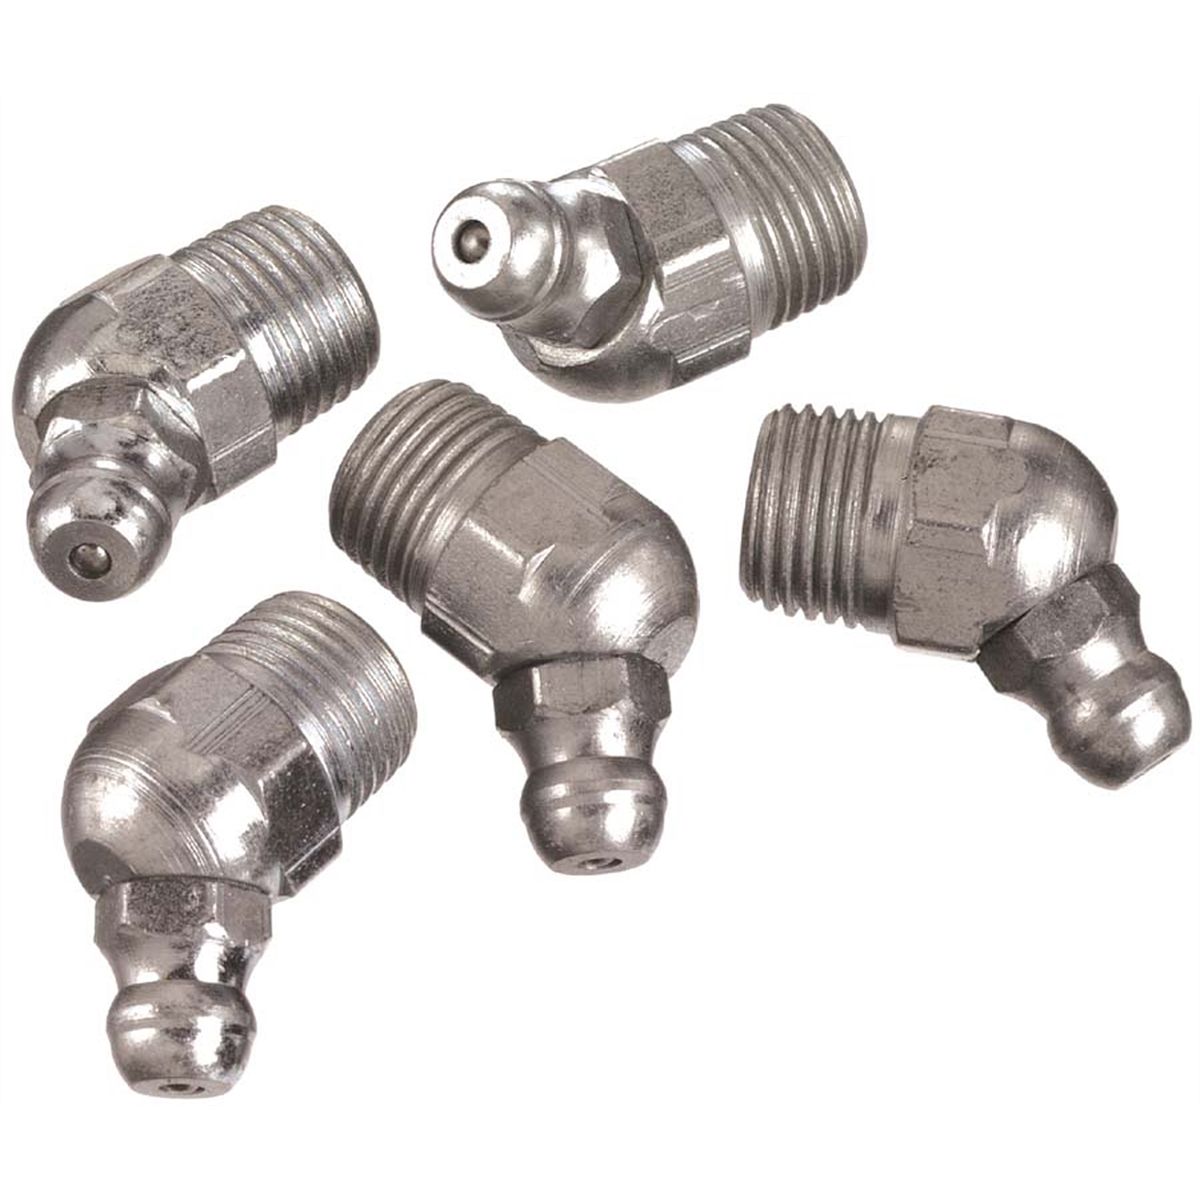 Short 1/4 In-28 Taper Thread Pack - 45? Angle Fittings